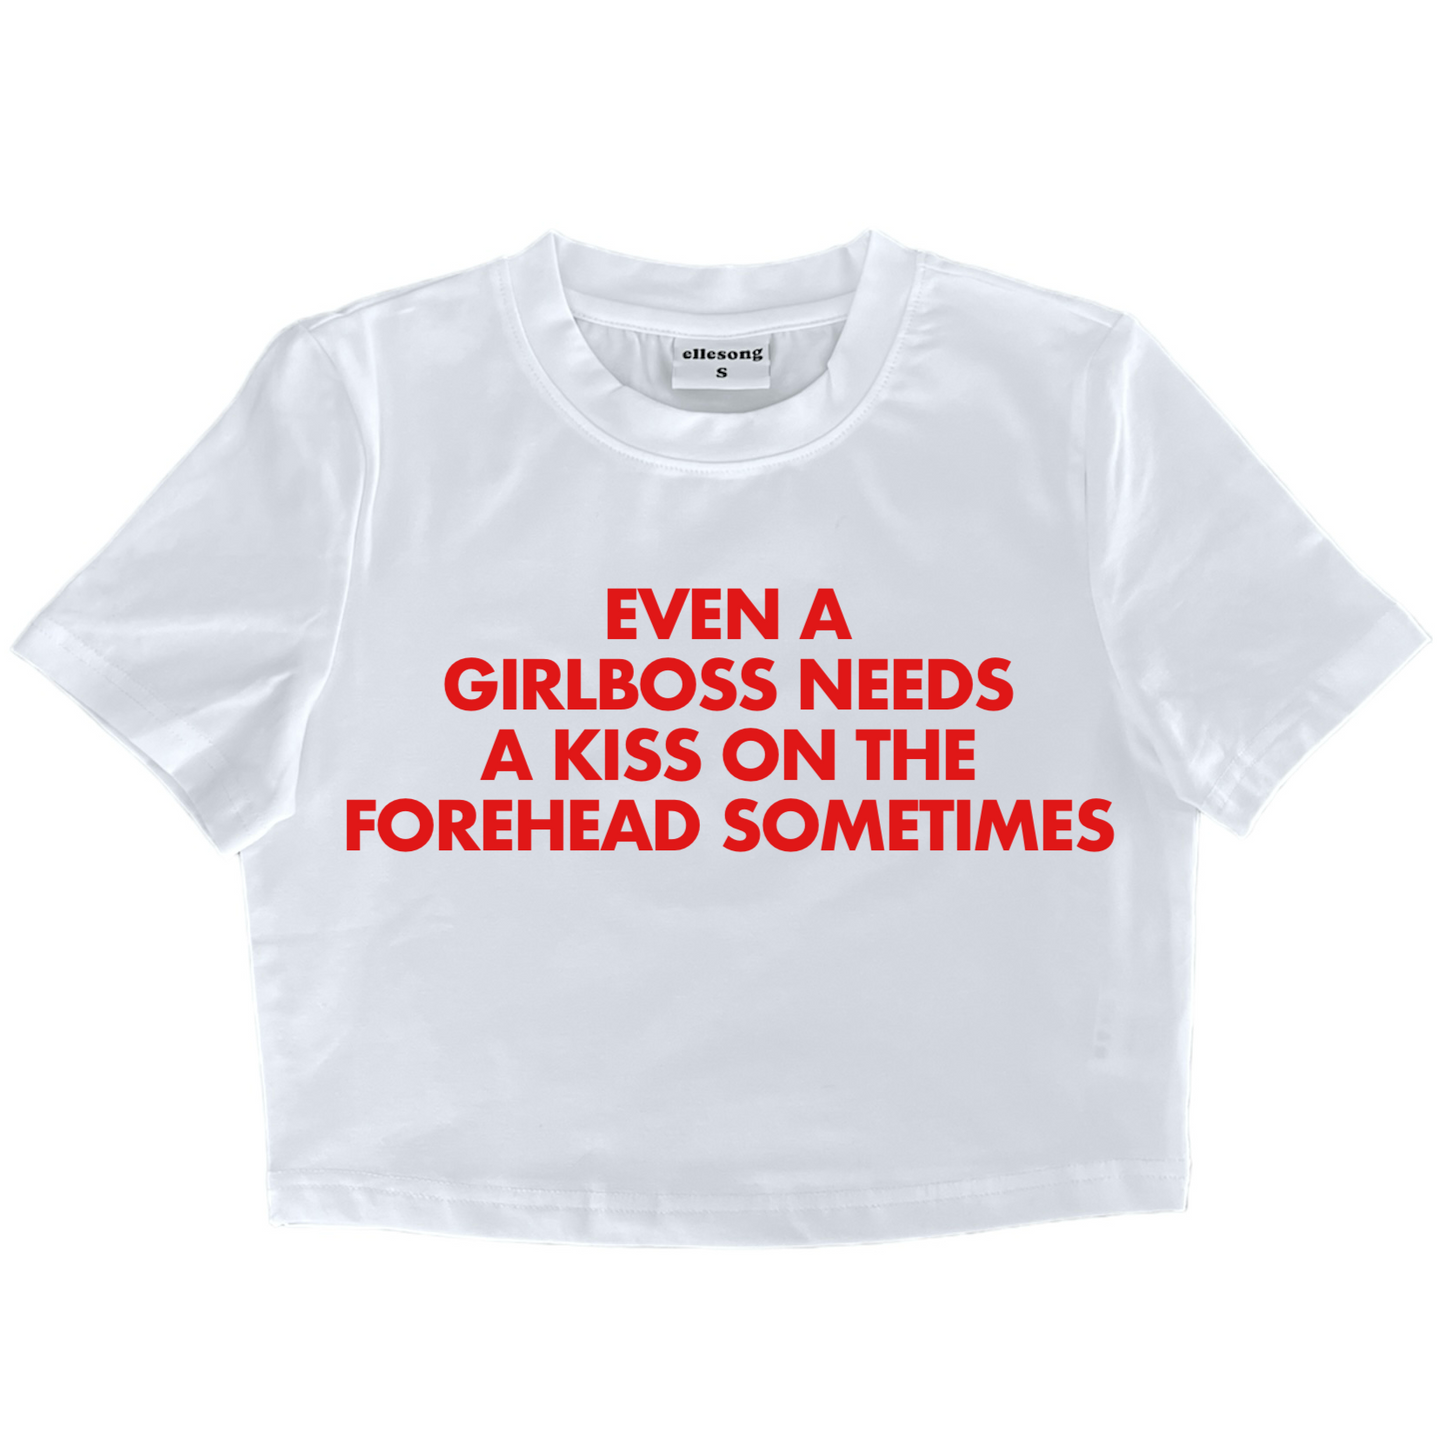 Even A Girlboss Needs A Kiss On The Forehead Sometimes Baby Tee